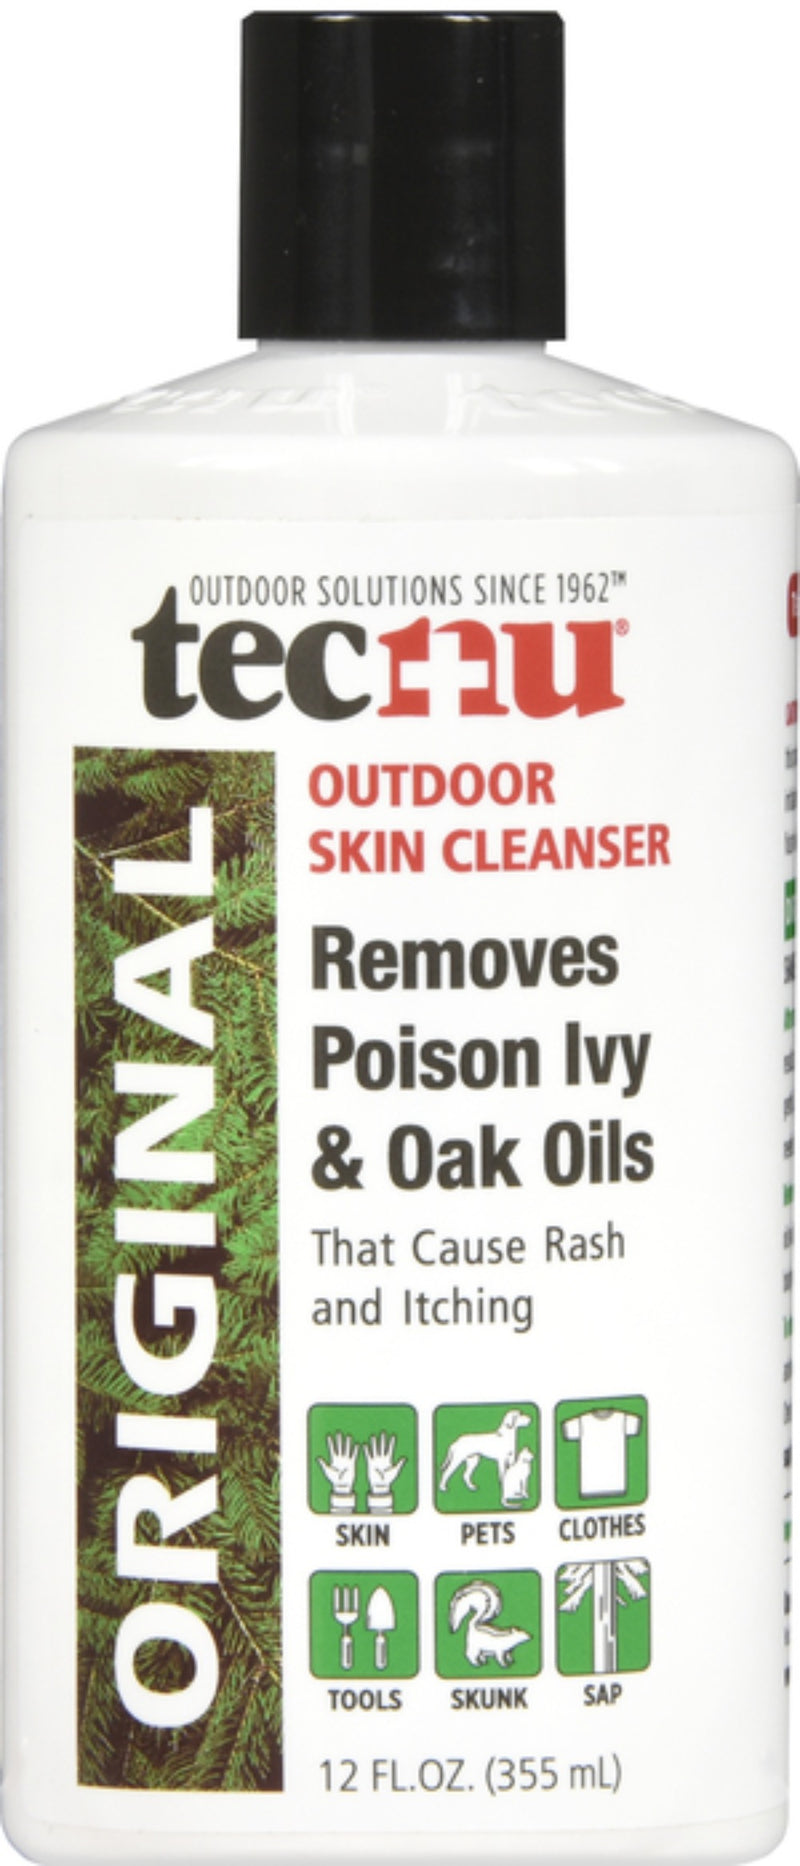 Tecnu Outdoor Skin Cleanser - Removes Poison Ivy & Oak Oils that Cause Rash & Itching - 12 fl oz